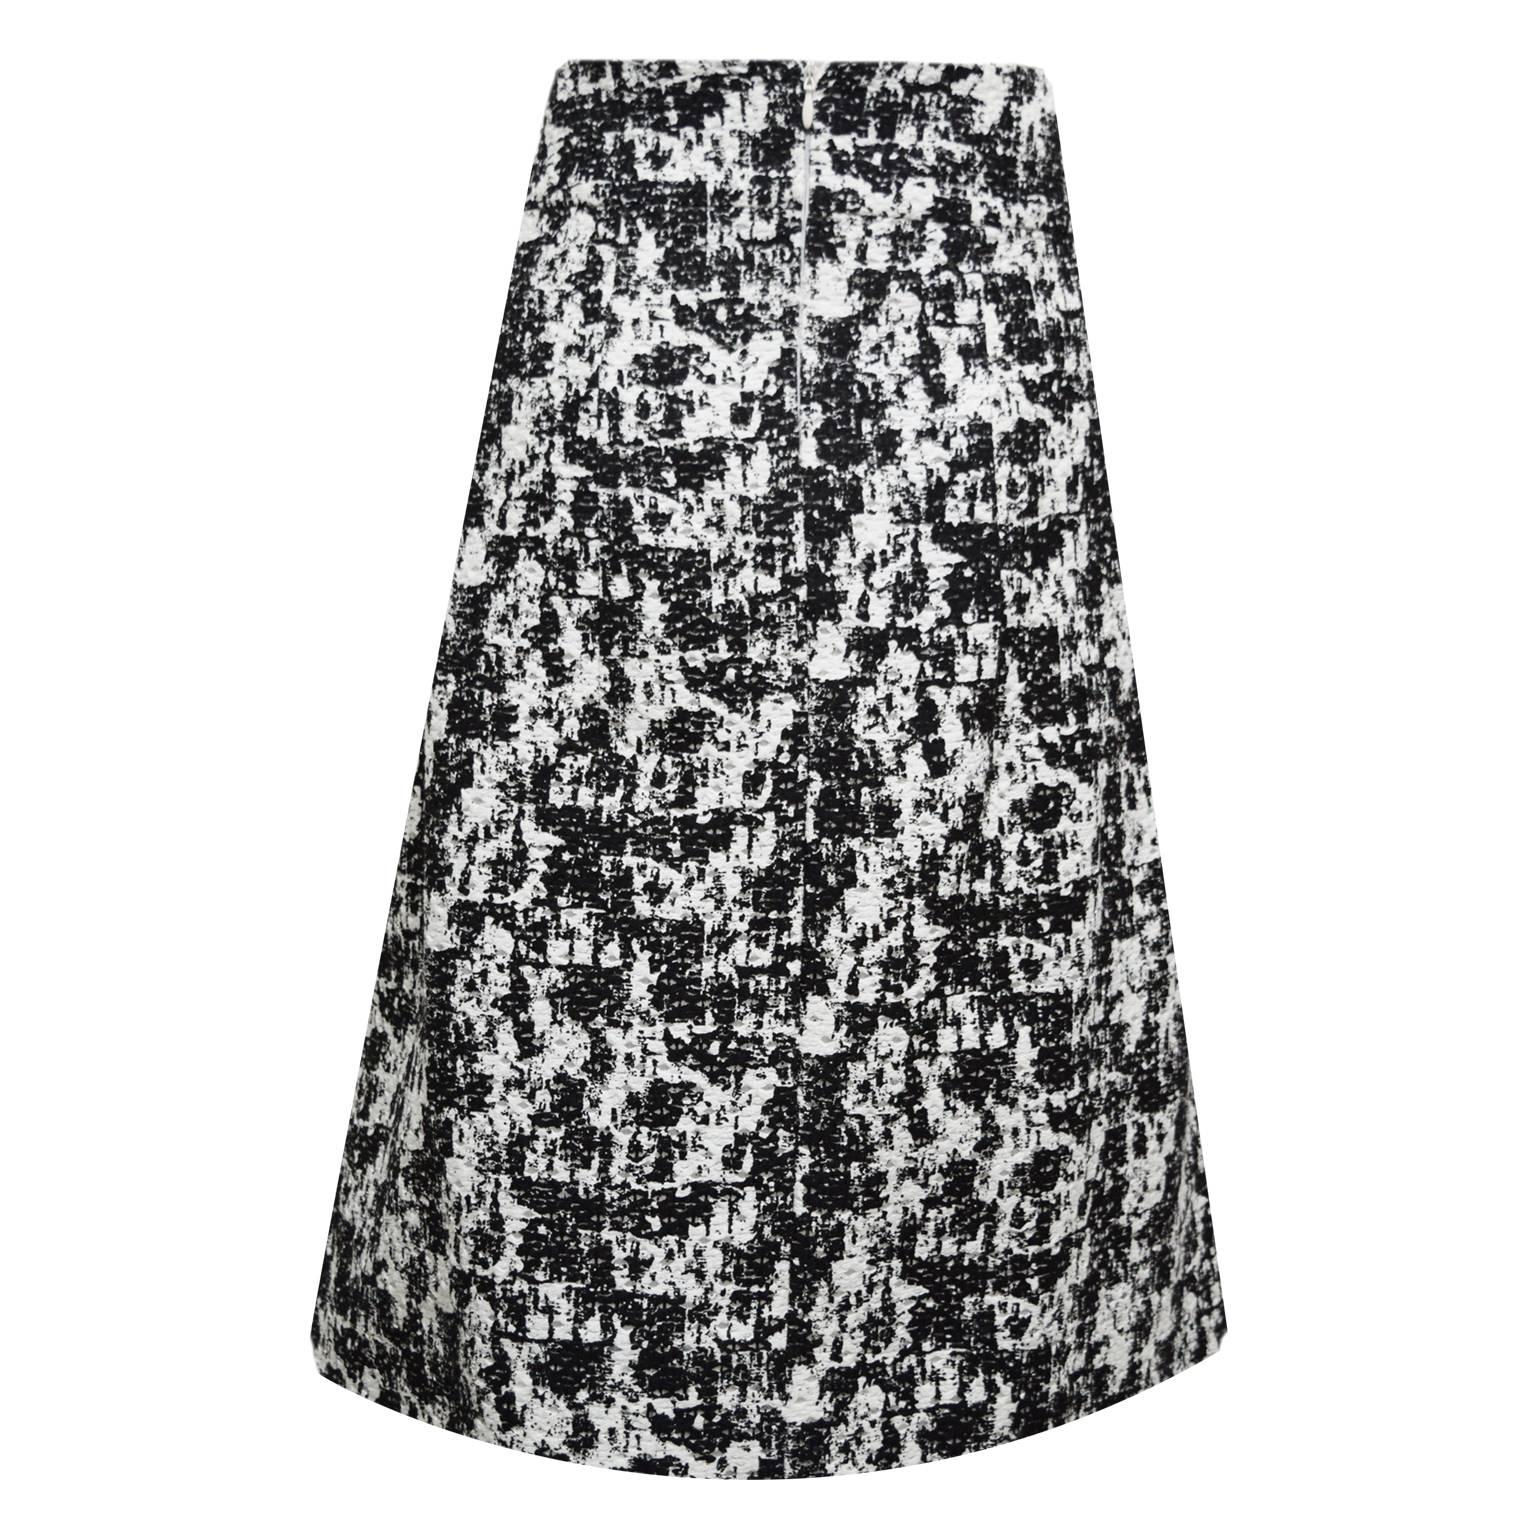 This beautiful Oscar de la Renta Aline skirt is black and white abstract speckled print cotton, polyester blend. The skirt is fully lined with silk and there are front and back knife pleating details. There is a back zipped closure and it is brand